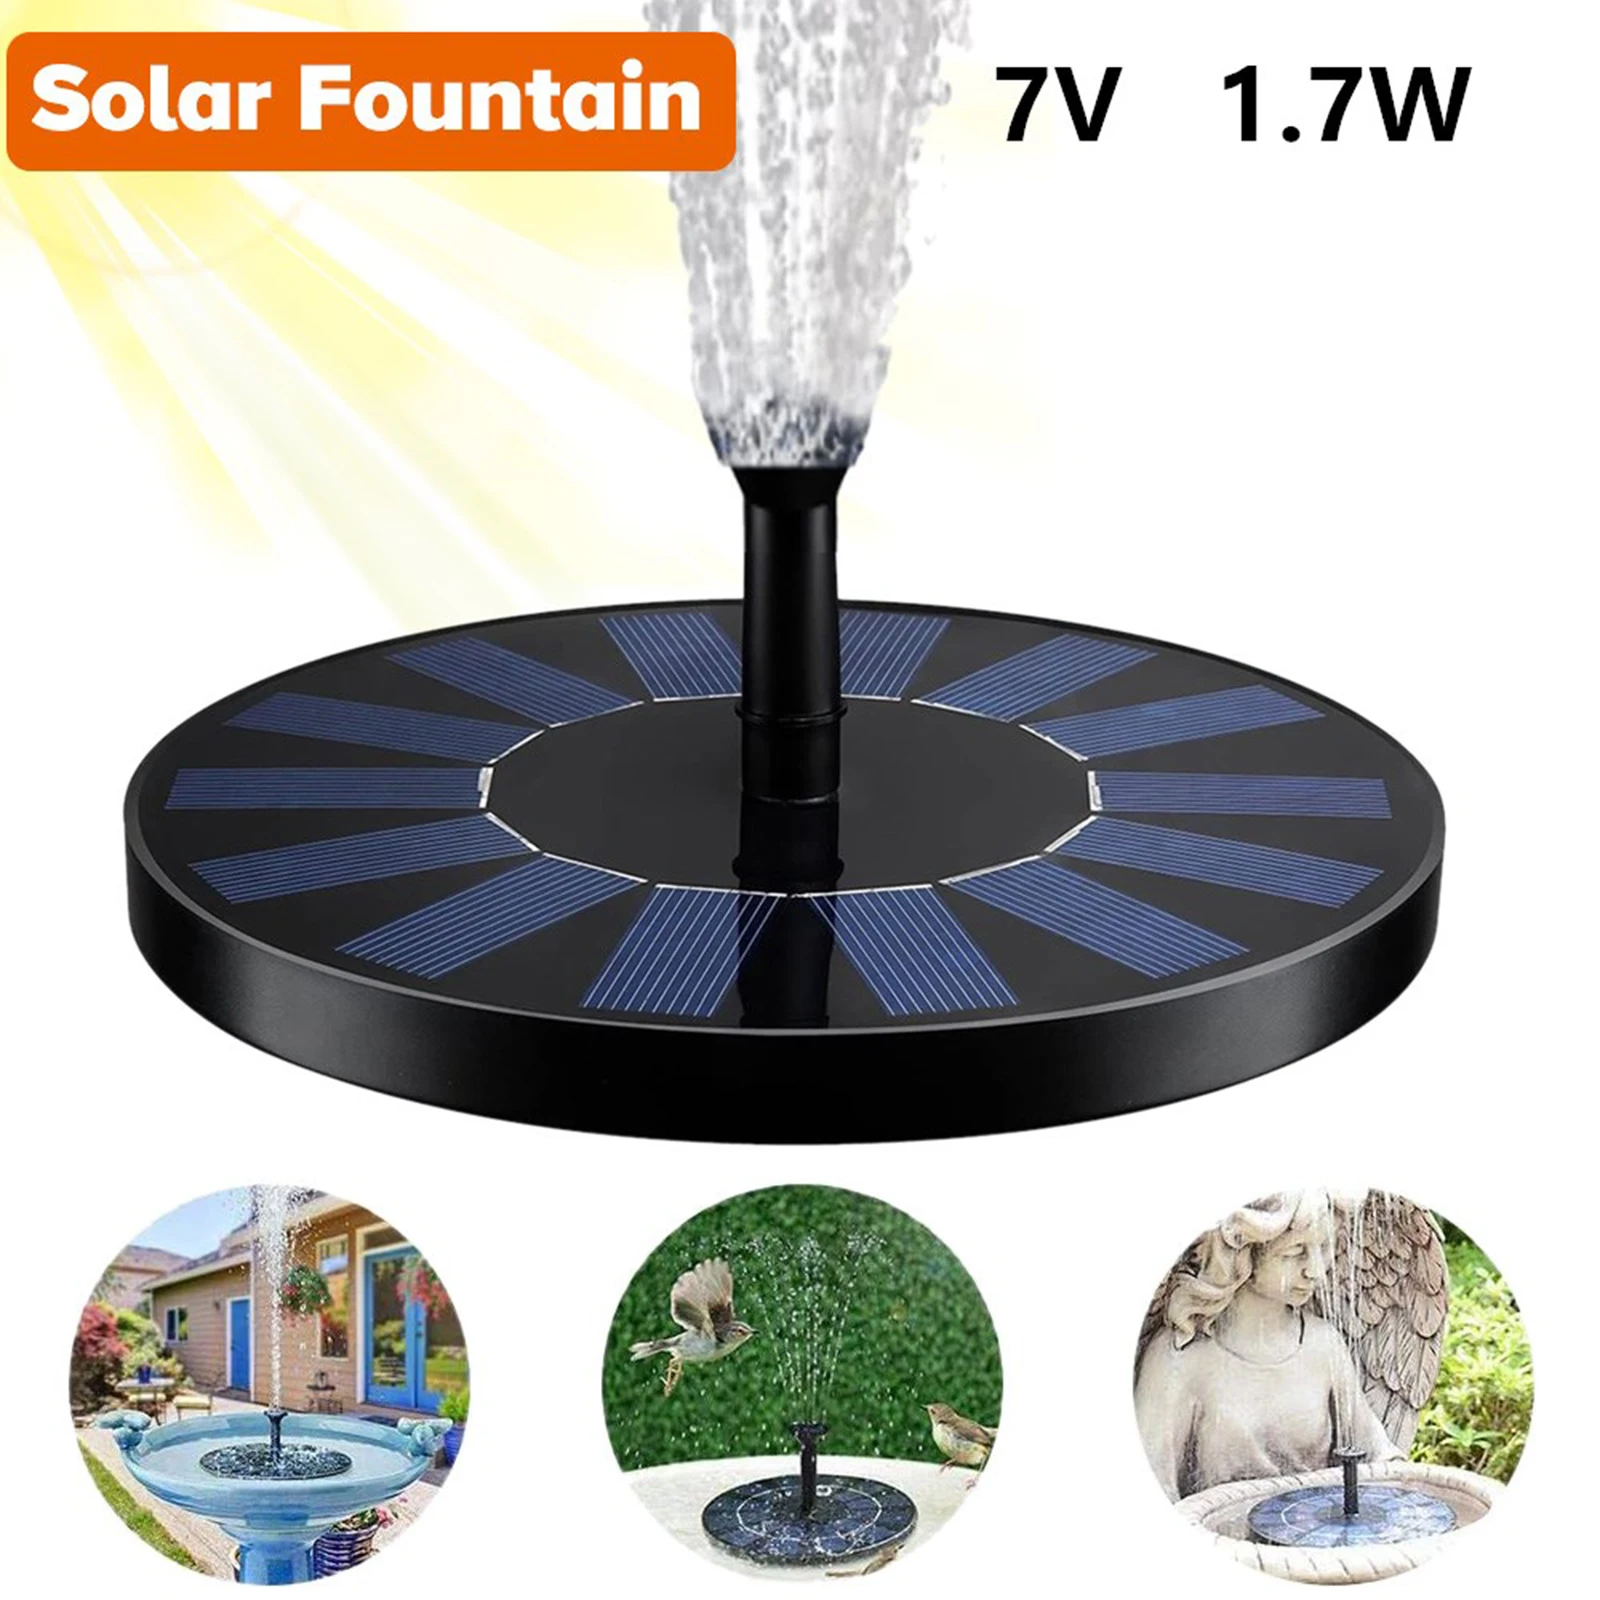 Floating Solar Fountain Water Fountain Decoration Pool Pond Solar Panel Powered Water Pump for Outdoor Garden Patio Fish Tank